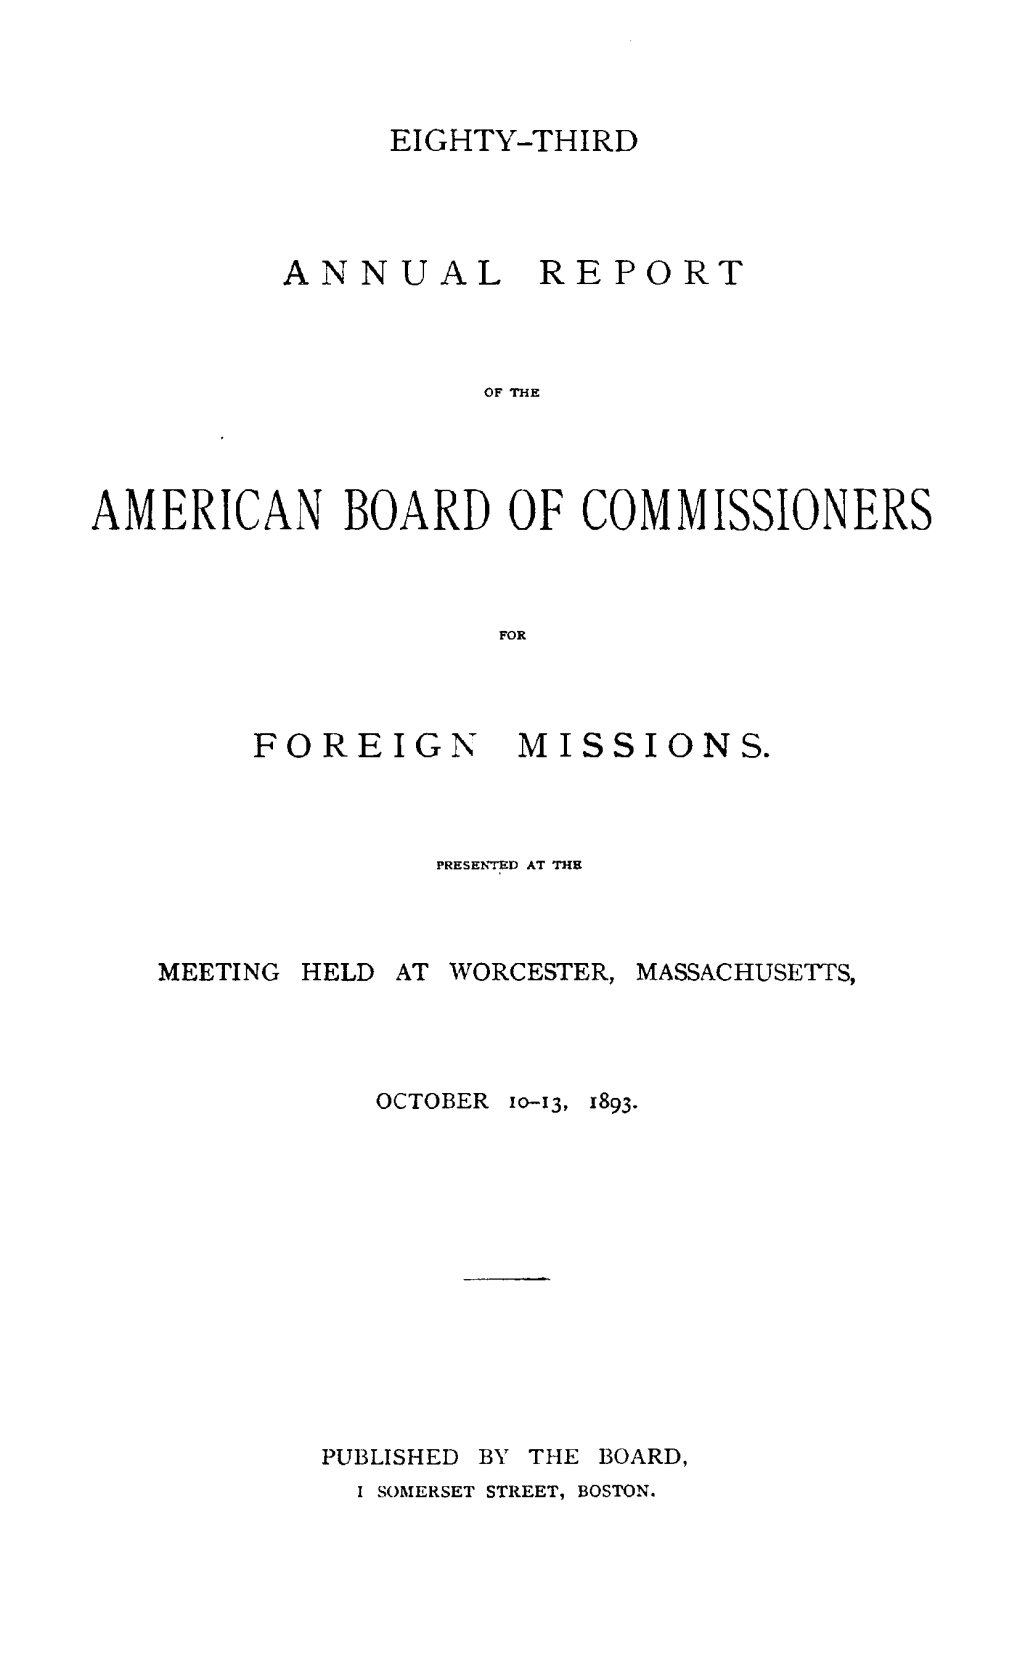 American Board of Commissioners